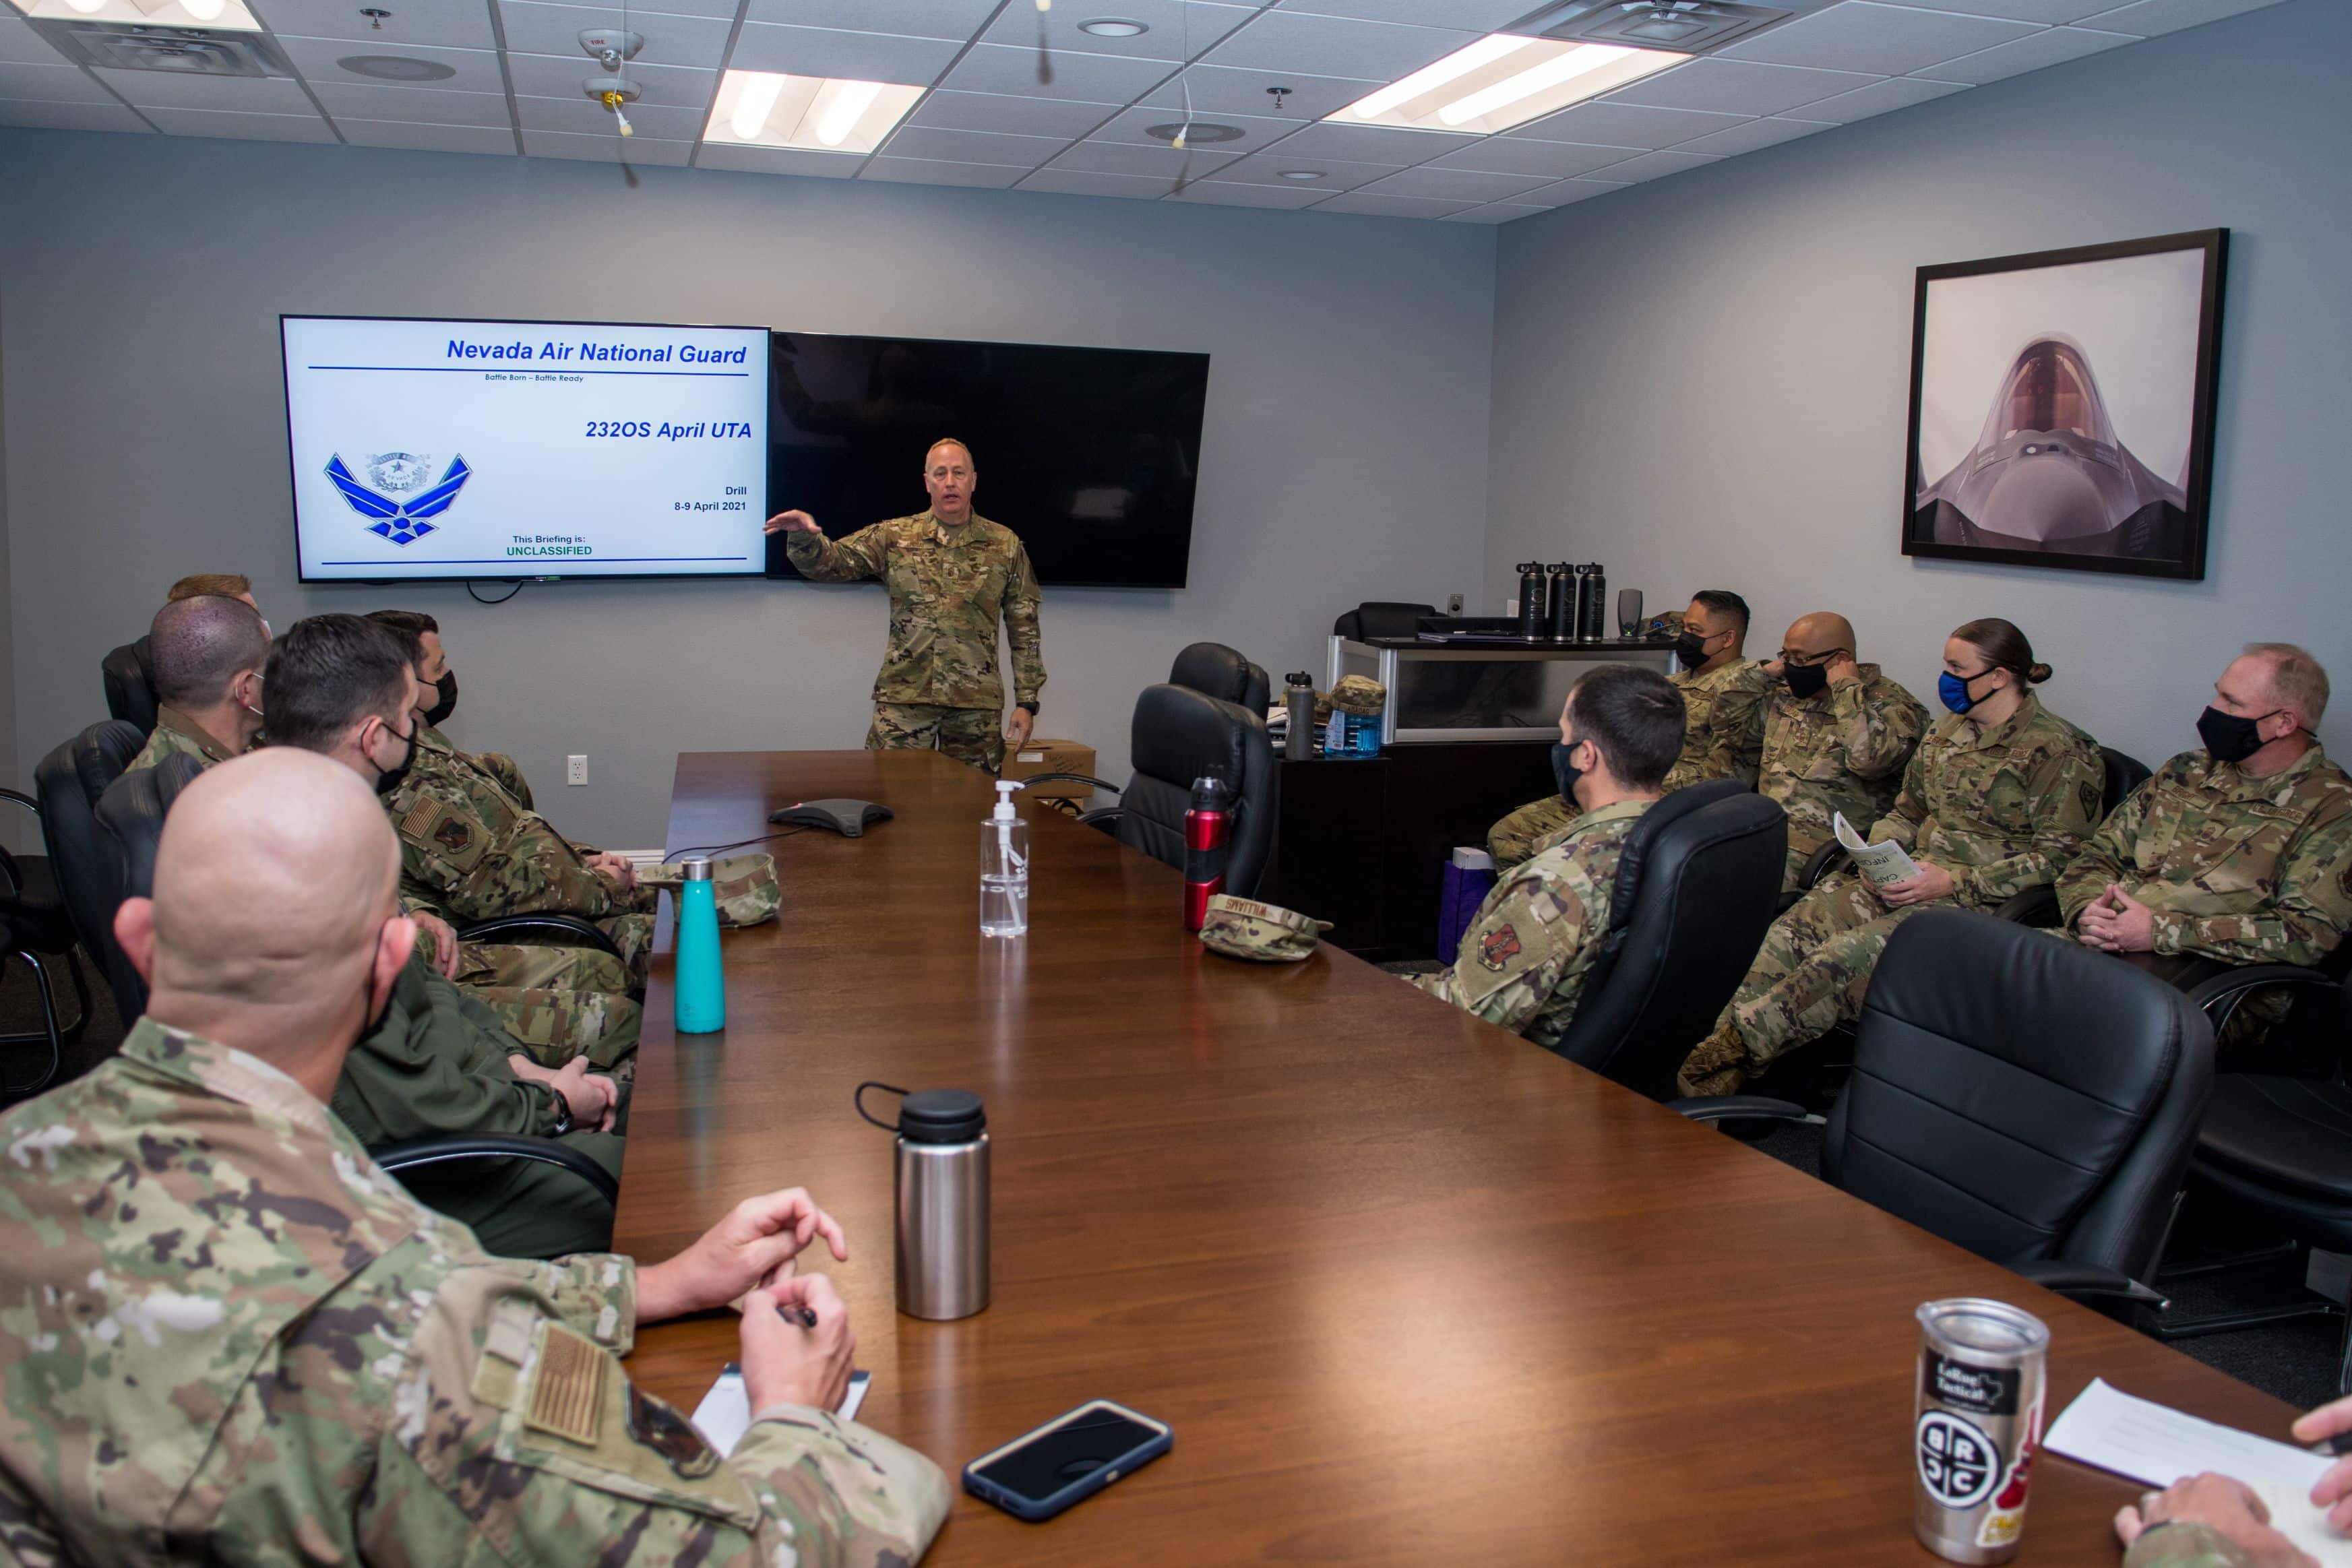 Nevada Air National Guard Command Chief Master Sergeant James Lindsay addresses the 232nd Operations Squadron during an Enlisted Call, Apr. 8, 2021, at Nellis AFB, Nev. The 232nd OS currently supports the operation of the Nevada Virtual Test and Training Center.